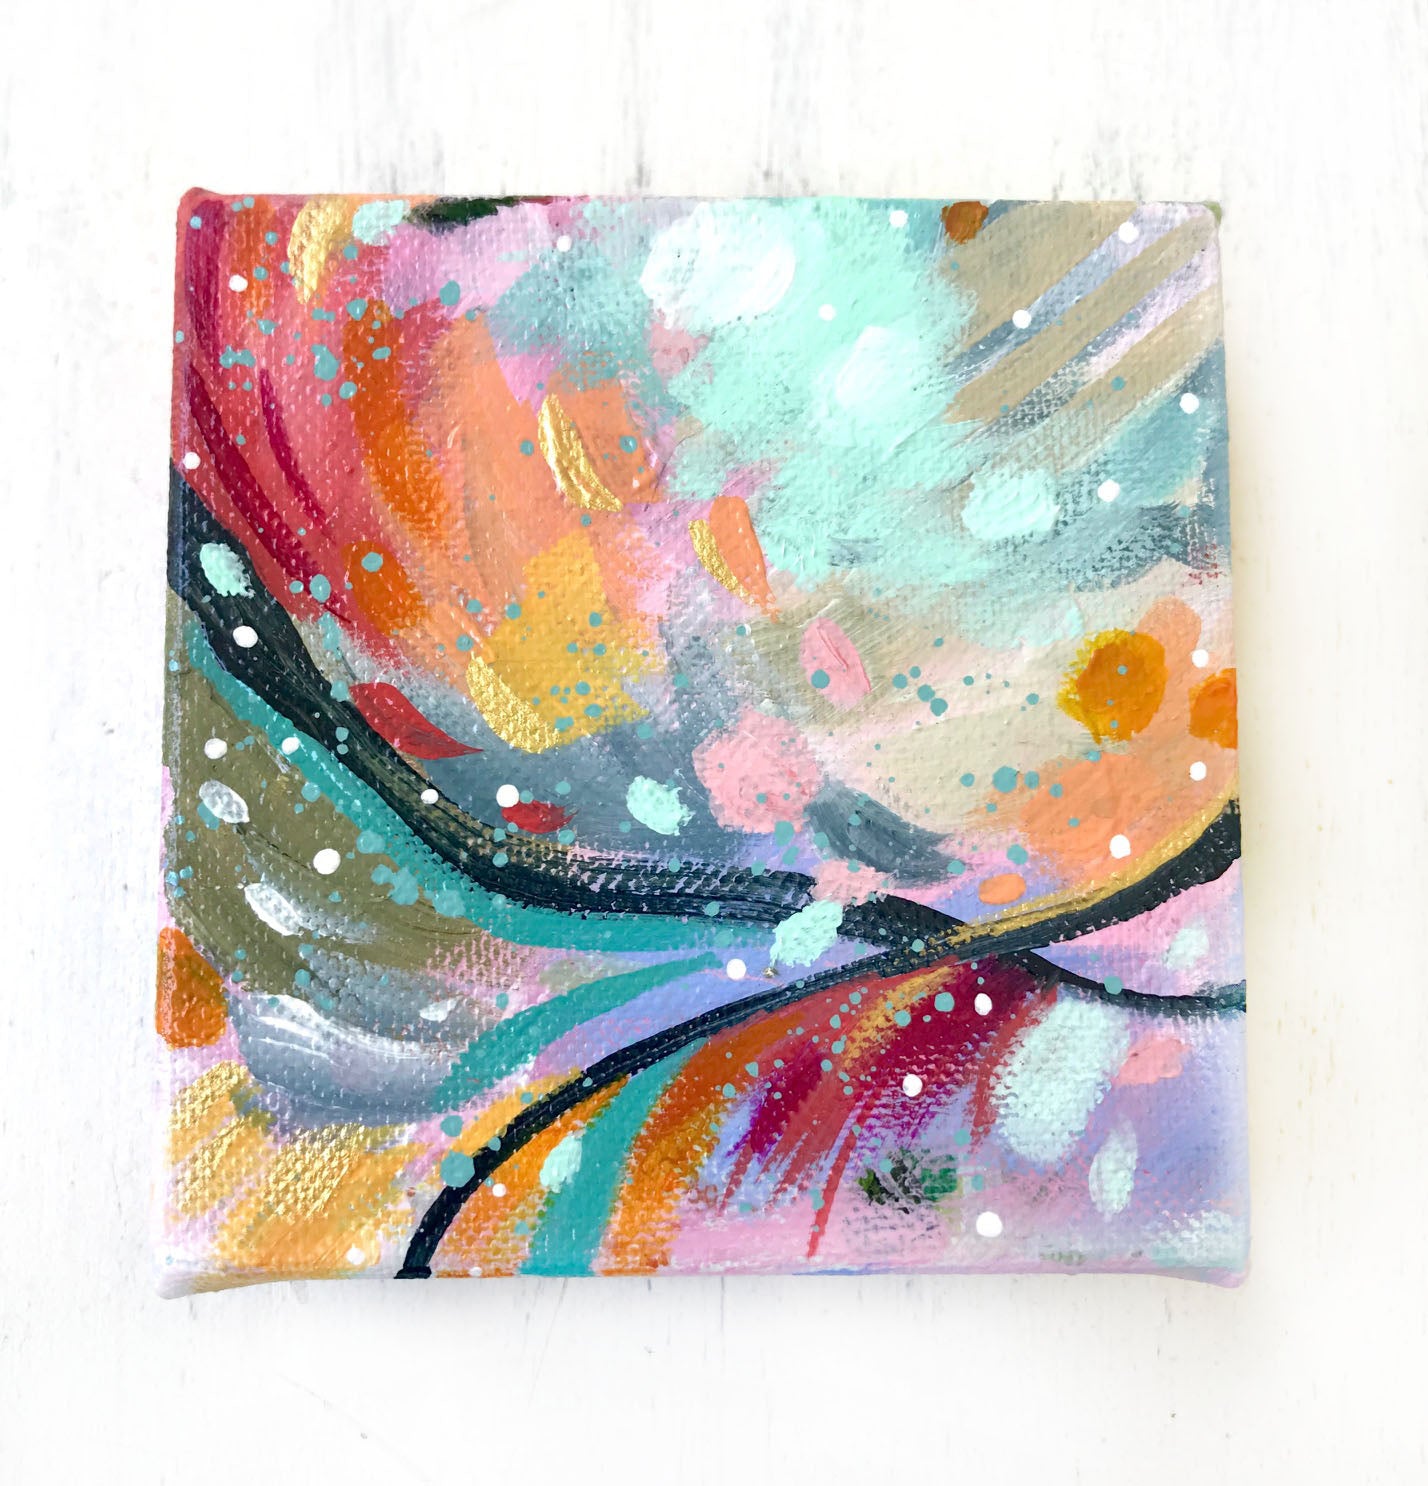 Abstract Original Painting "Live by the Light" 4x4 inch Gallery Wrapped Canvas - Bethany Joy Art